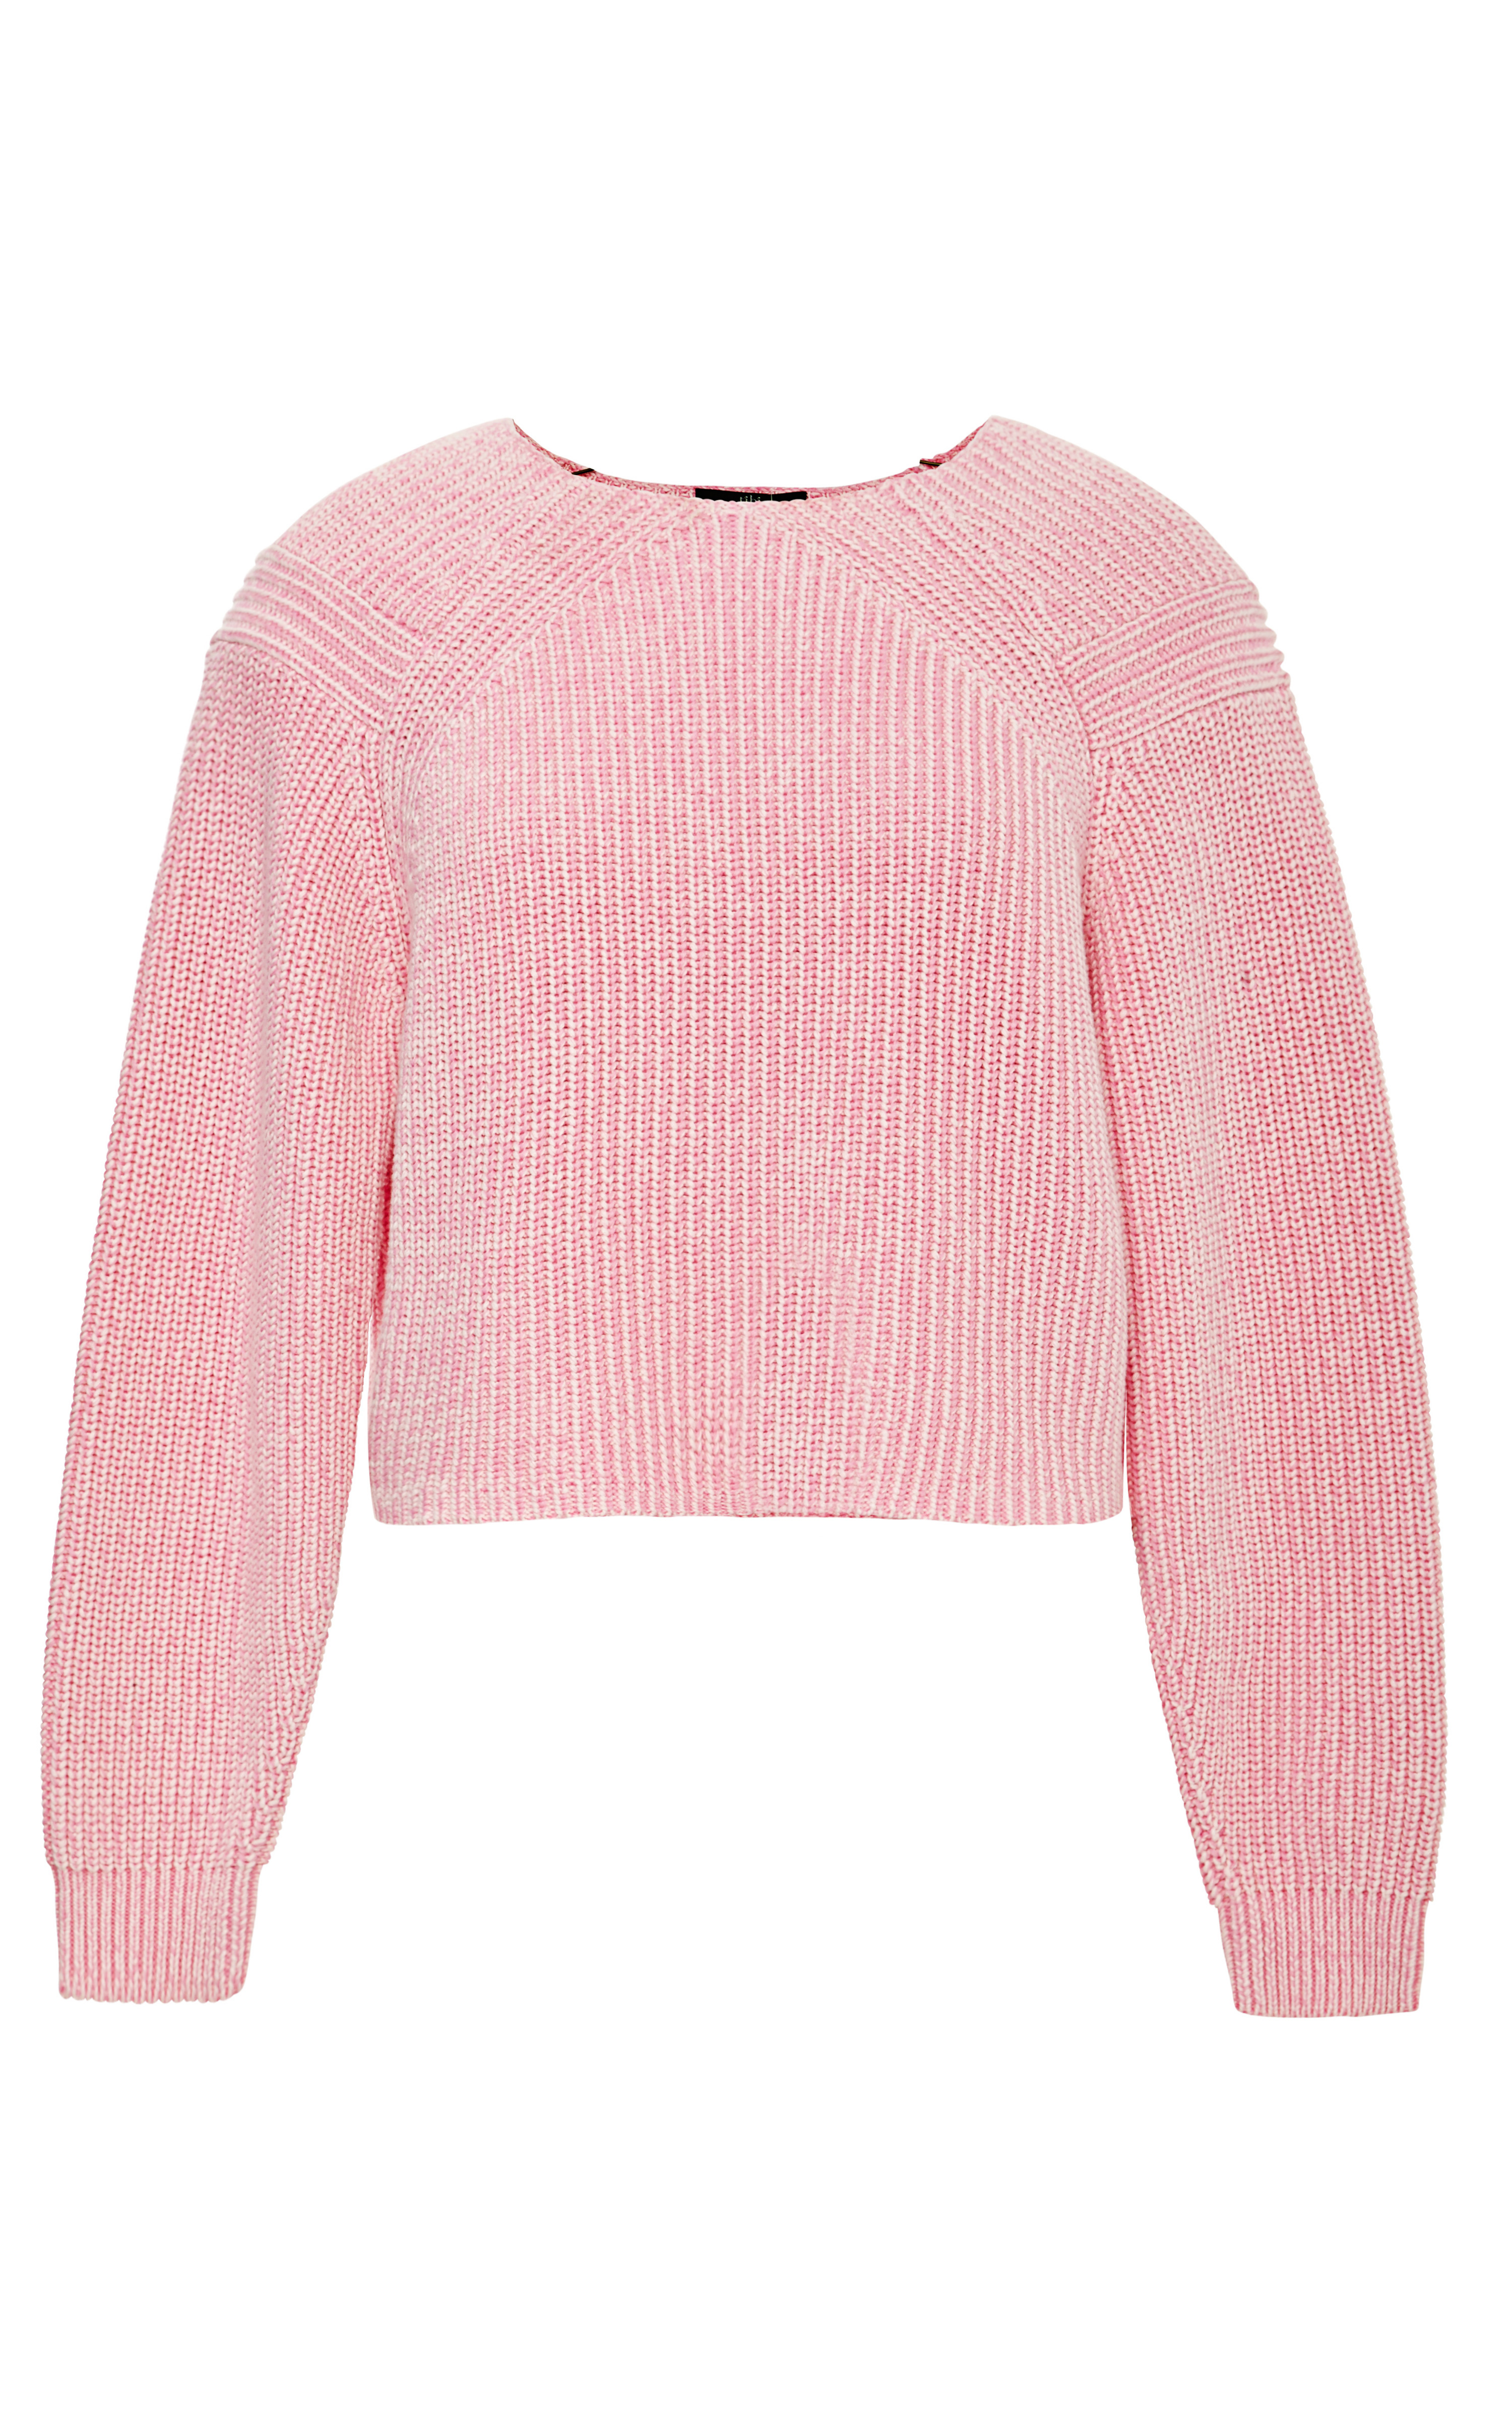 Lyst - Tibi Plaited Sweater Cropped Pullover in Pink